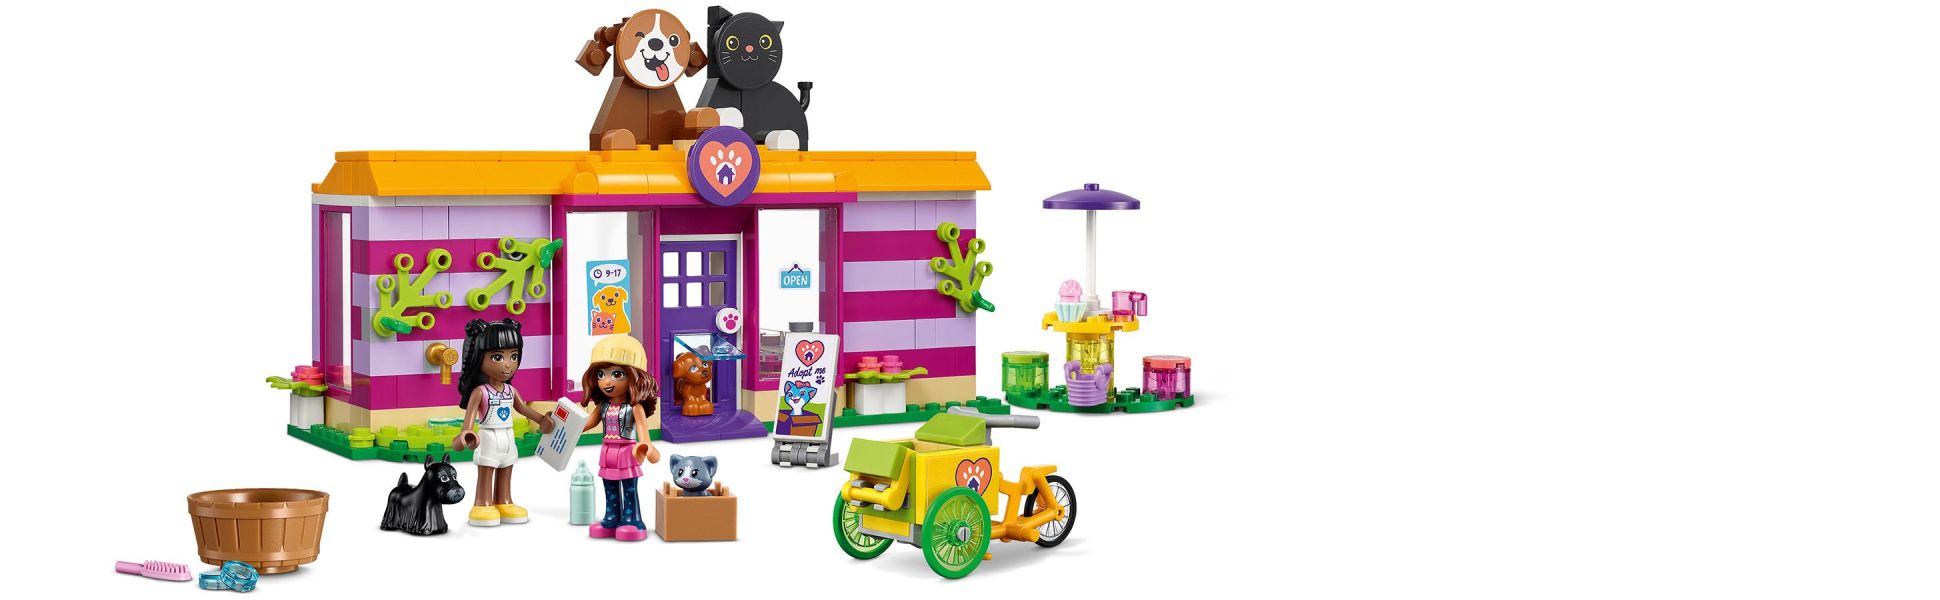 Toys for & Kids and Cat 6+ Friends Figures, Mini-Dolls, Boys, Building Girls, Pet Set Adoption Dog Café & - Creative Olivia Priyanka Animal Rescue Collectible 41699 Toy LEGO with Ages